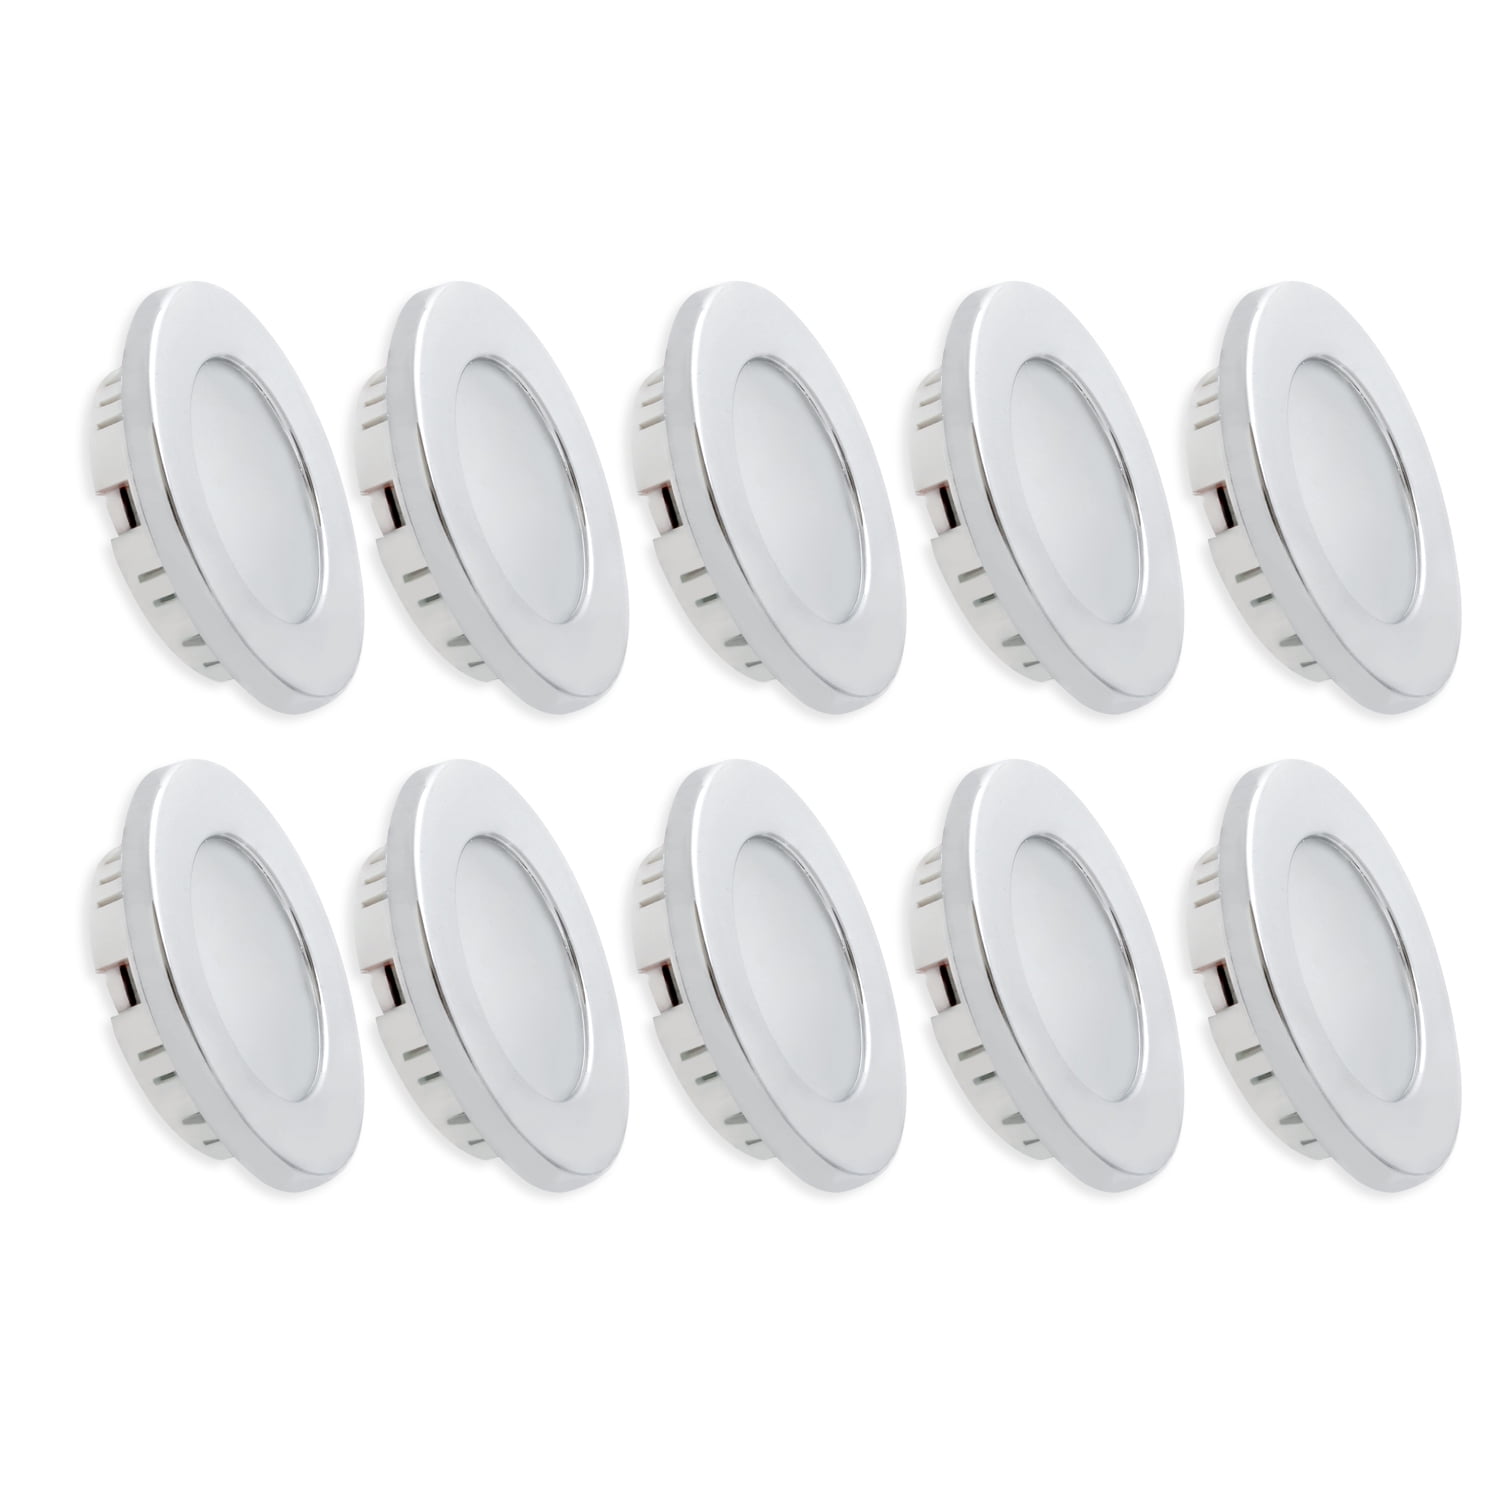 Details about   10  3.375" Down Lights Petite LED RECESSED INTERIOR CEILING FOR RVs BOATS 12V WW 